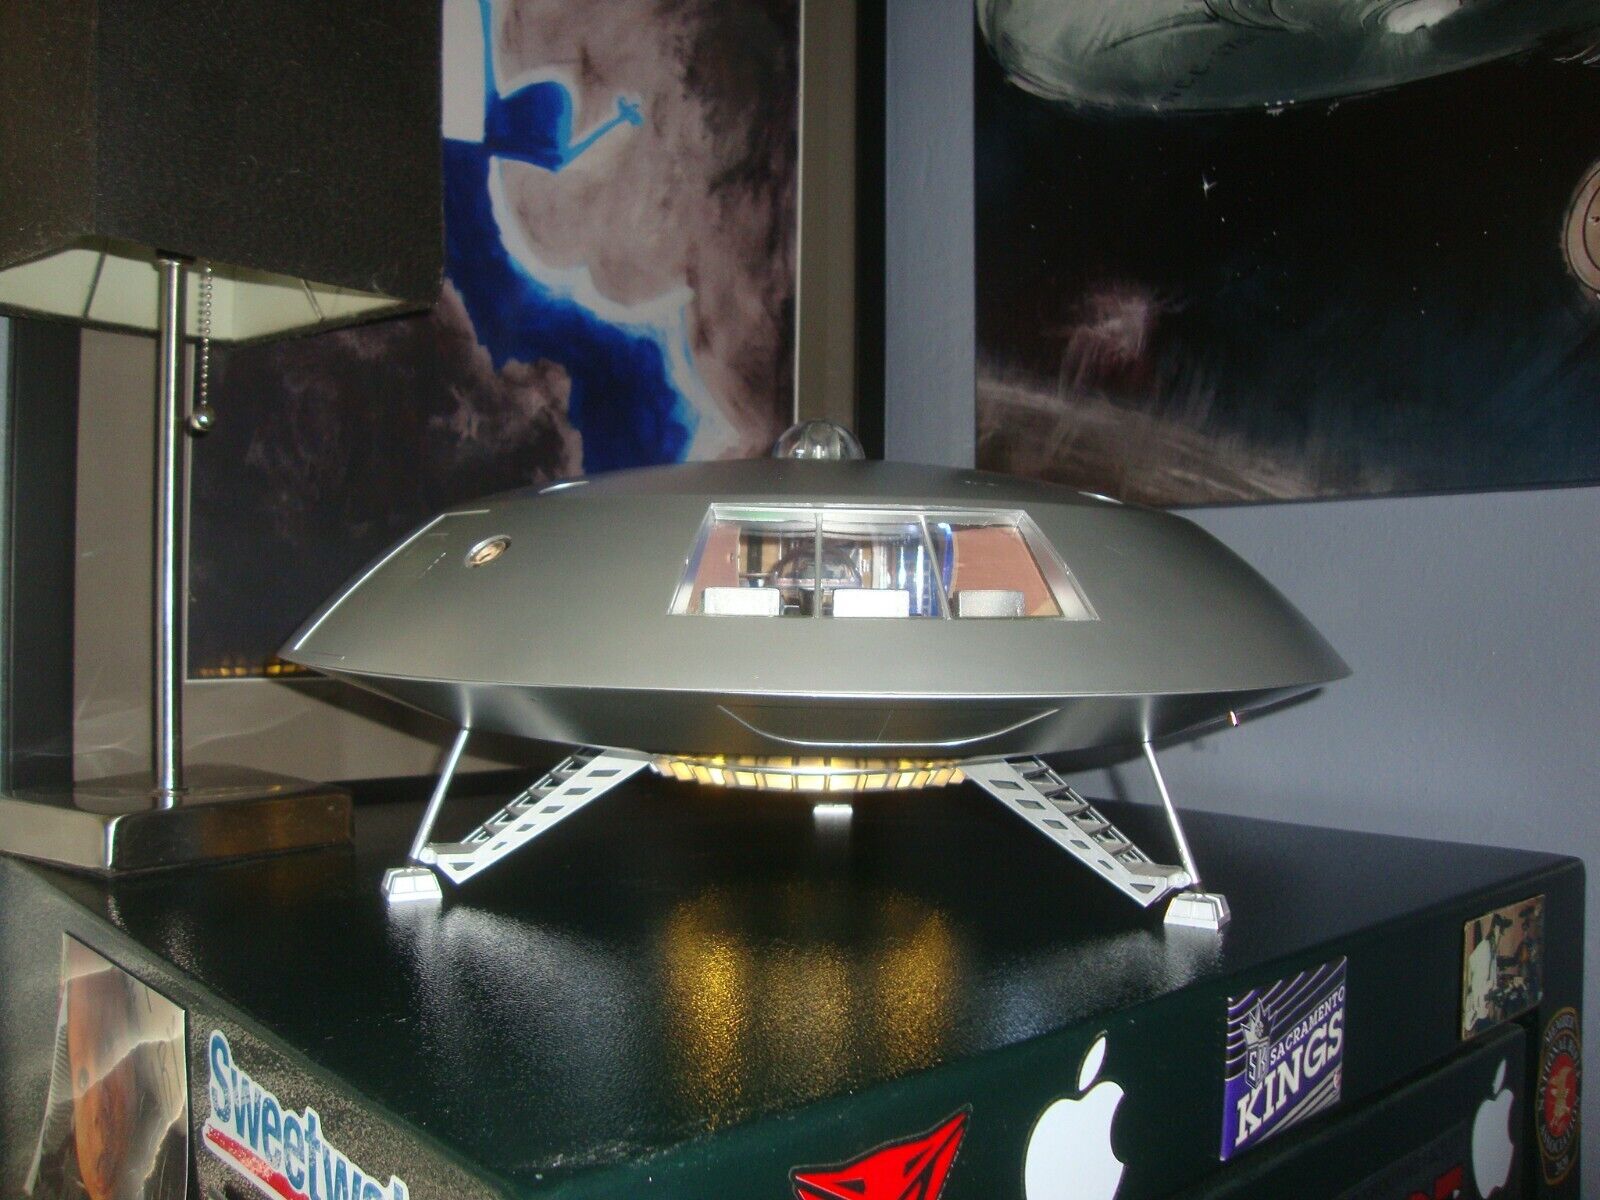 Lost In Space Jupiter 2 Model built and painted